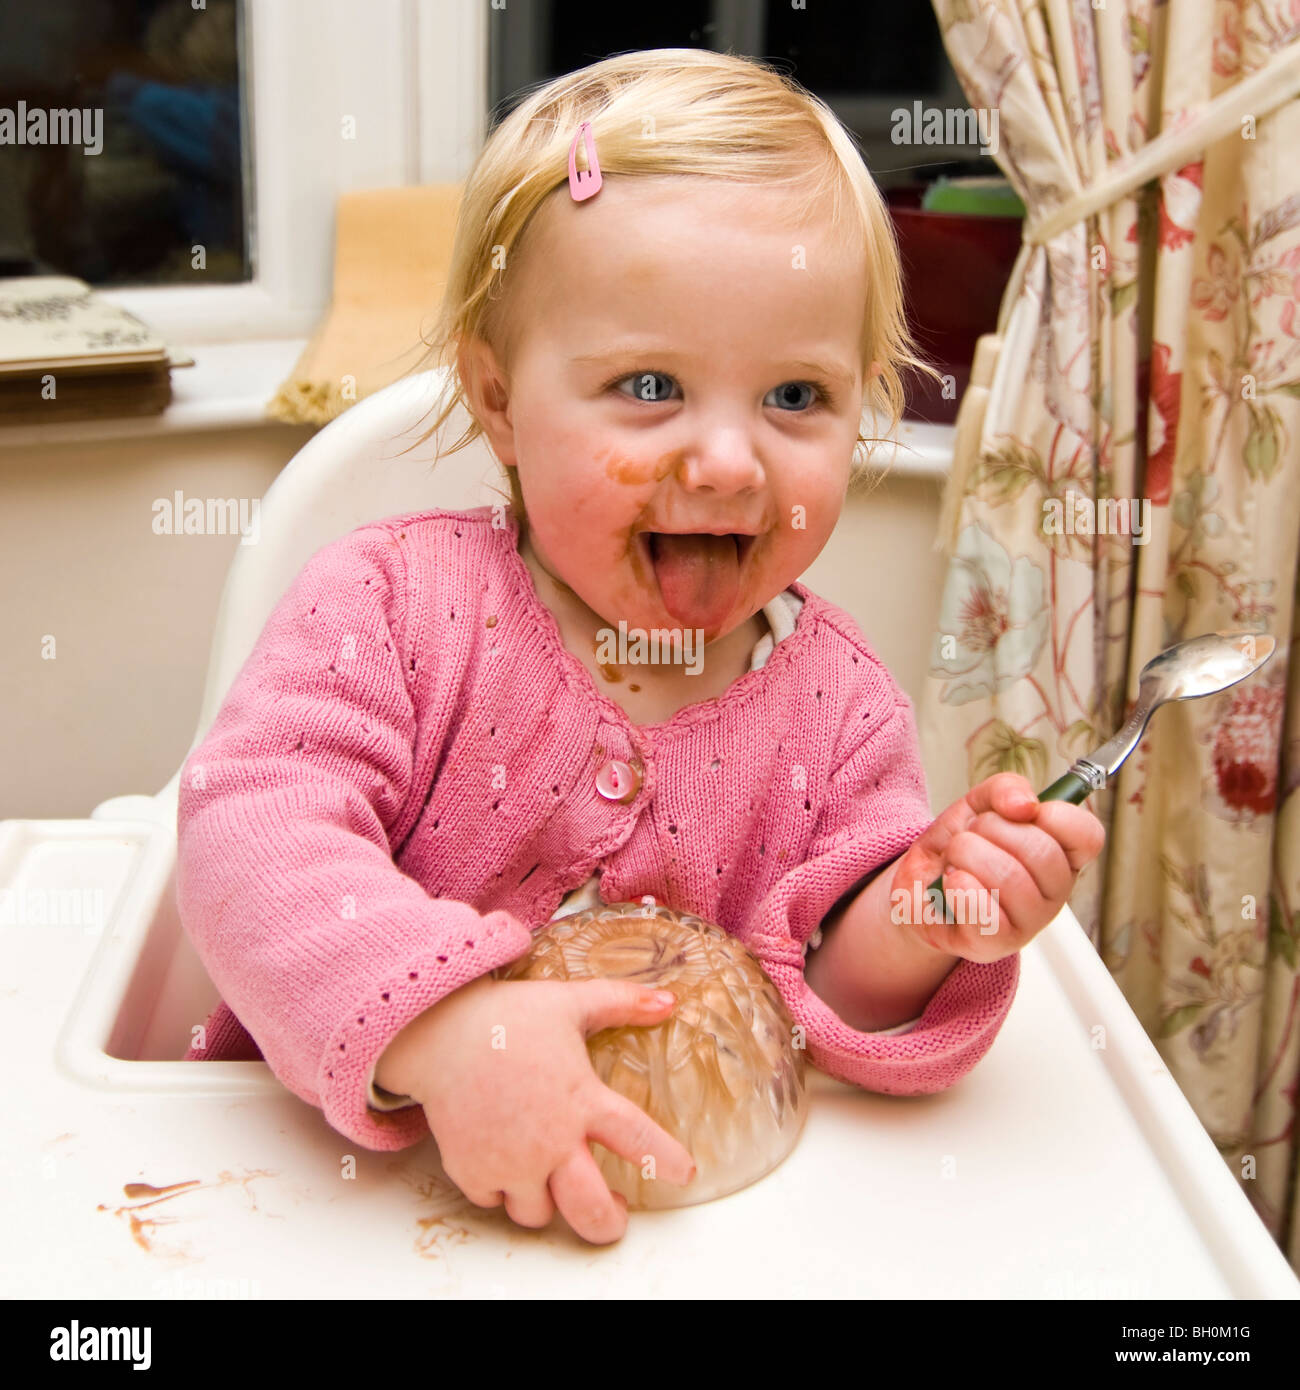 Square close up portrait of a baby girl getting in a mess eating chocolate ice cream in her high chair. Stock Photo